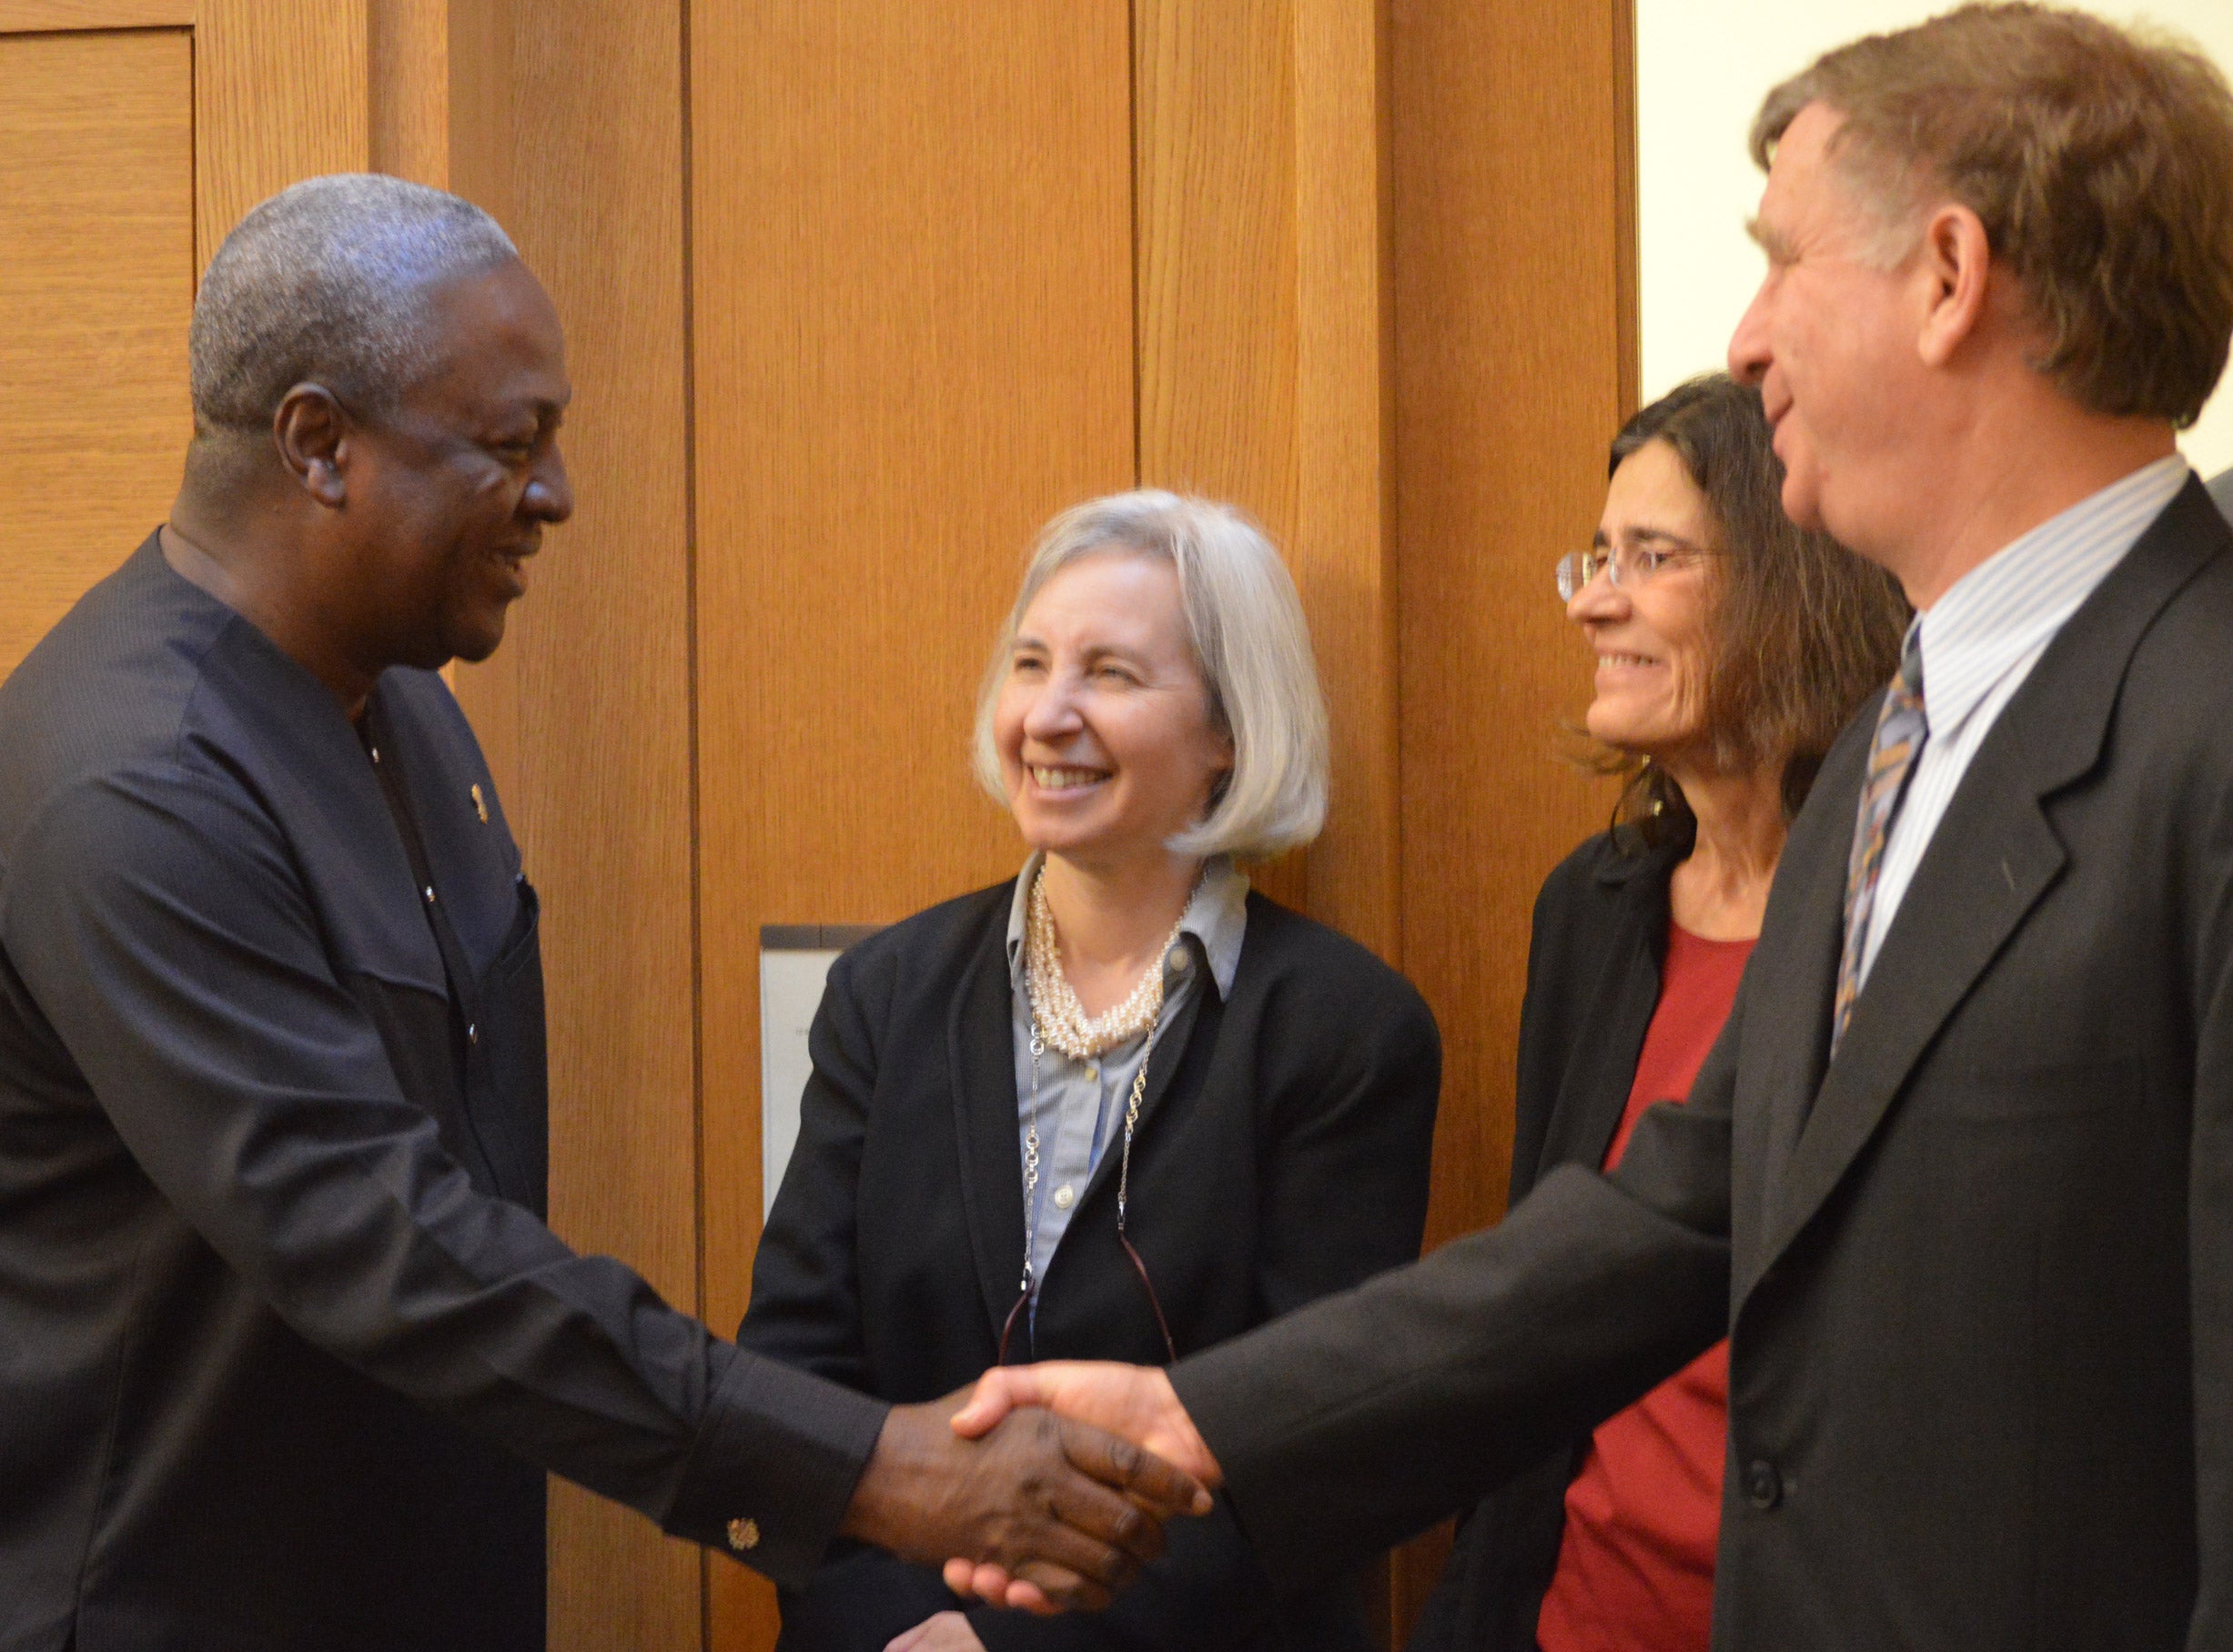 Mahama shaking hands with William Alford